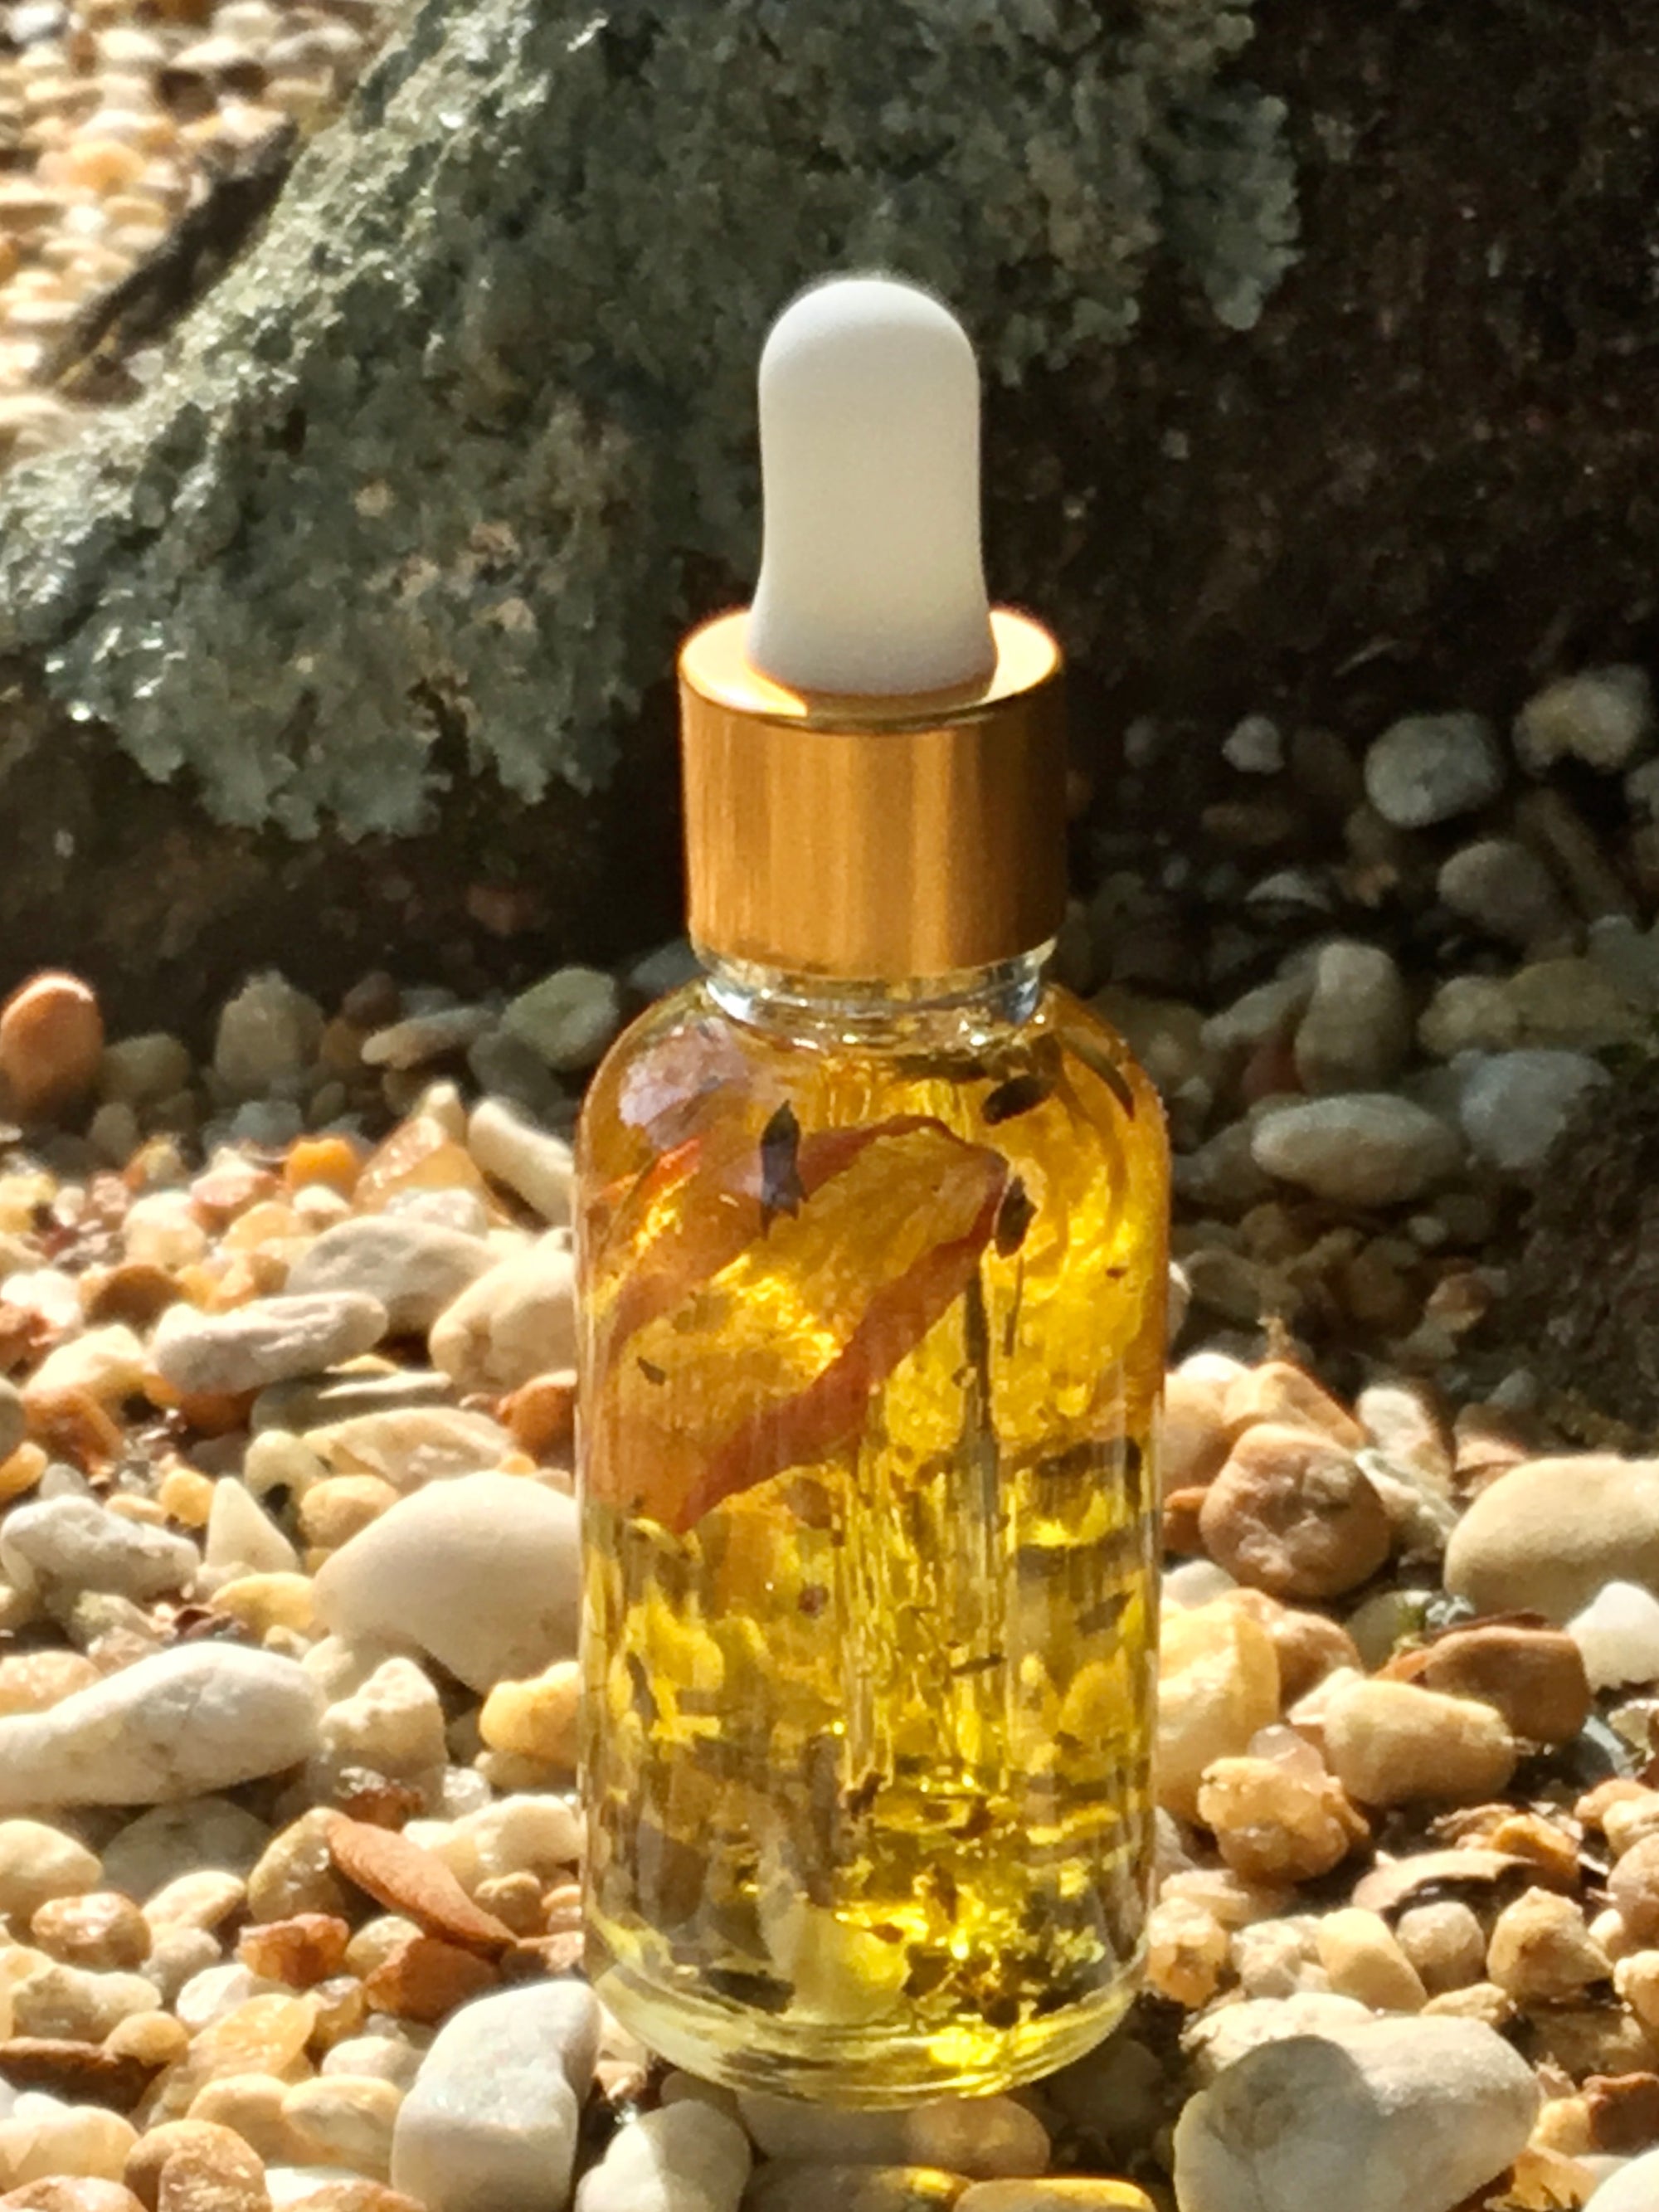 Conjure Oils, Hoodoo Oils, Condition Oils, Intention Oils